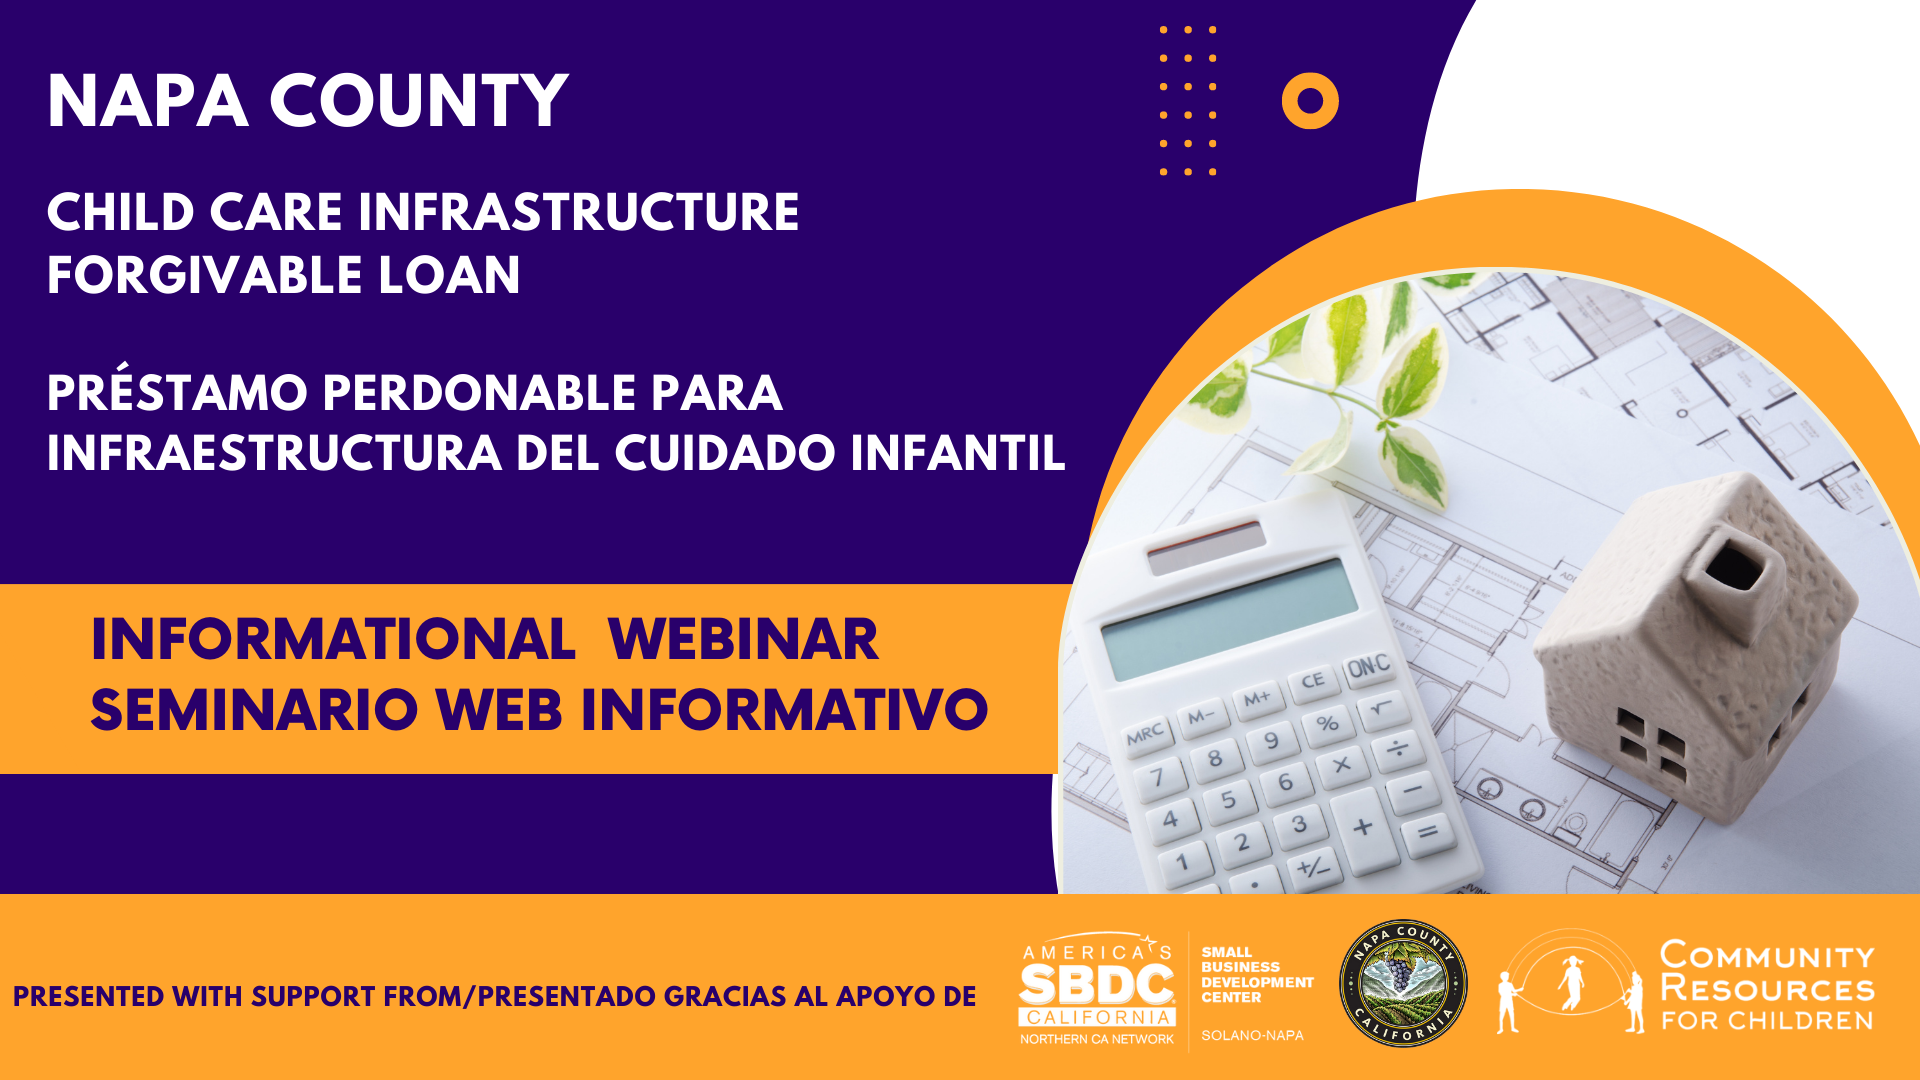 Napa County is offering a forgivable loan for child care infrastructure and hosting an informational webinar with support from the Small Business Development Center and the California Northern Network. Full Text: NAPA COUNTY O CHILD CARE INFRASTRUCTURE FORGIVABLE LOAN PRÉSTAMO PERDONABLE PARA INFRAESTRUCTURA DEL CUIDADO INFANTIL INFORMATIONAL WEBINAR SEMINARIO WEB INFORMATIVO CF ONC M. M. % MRC 9 x 00- 5 6 - 4 3 + 2 AMERICA'S COUNT SMALL PRESENTED WITH SUPPORT FROM/PRESENTADO GRACIAS AL APOYO DE SBDC COMMUNITY BUSINESS DEVELOPMENT CENTER RESOURCES CALIFORNIA NORTHERN CA NETWORK SOLANO-NAPA ALIFO FOR CHILDREN